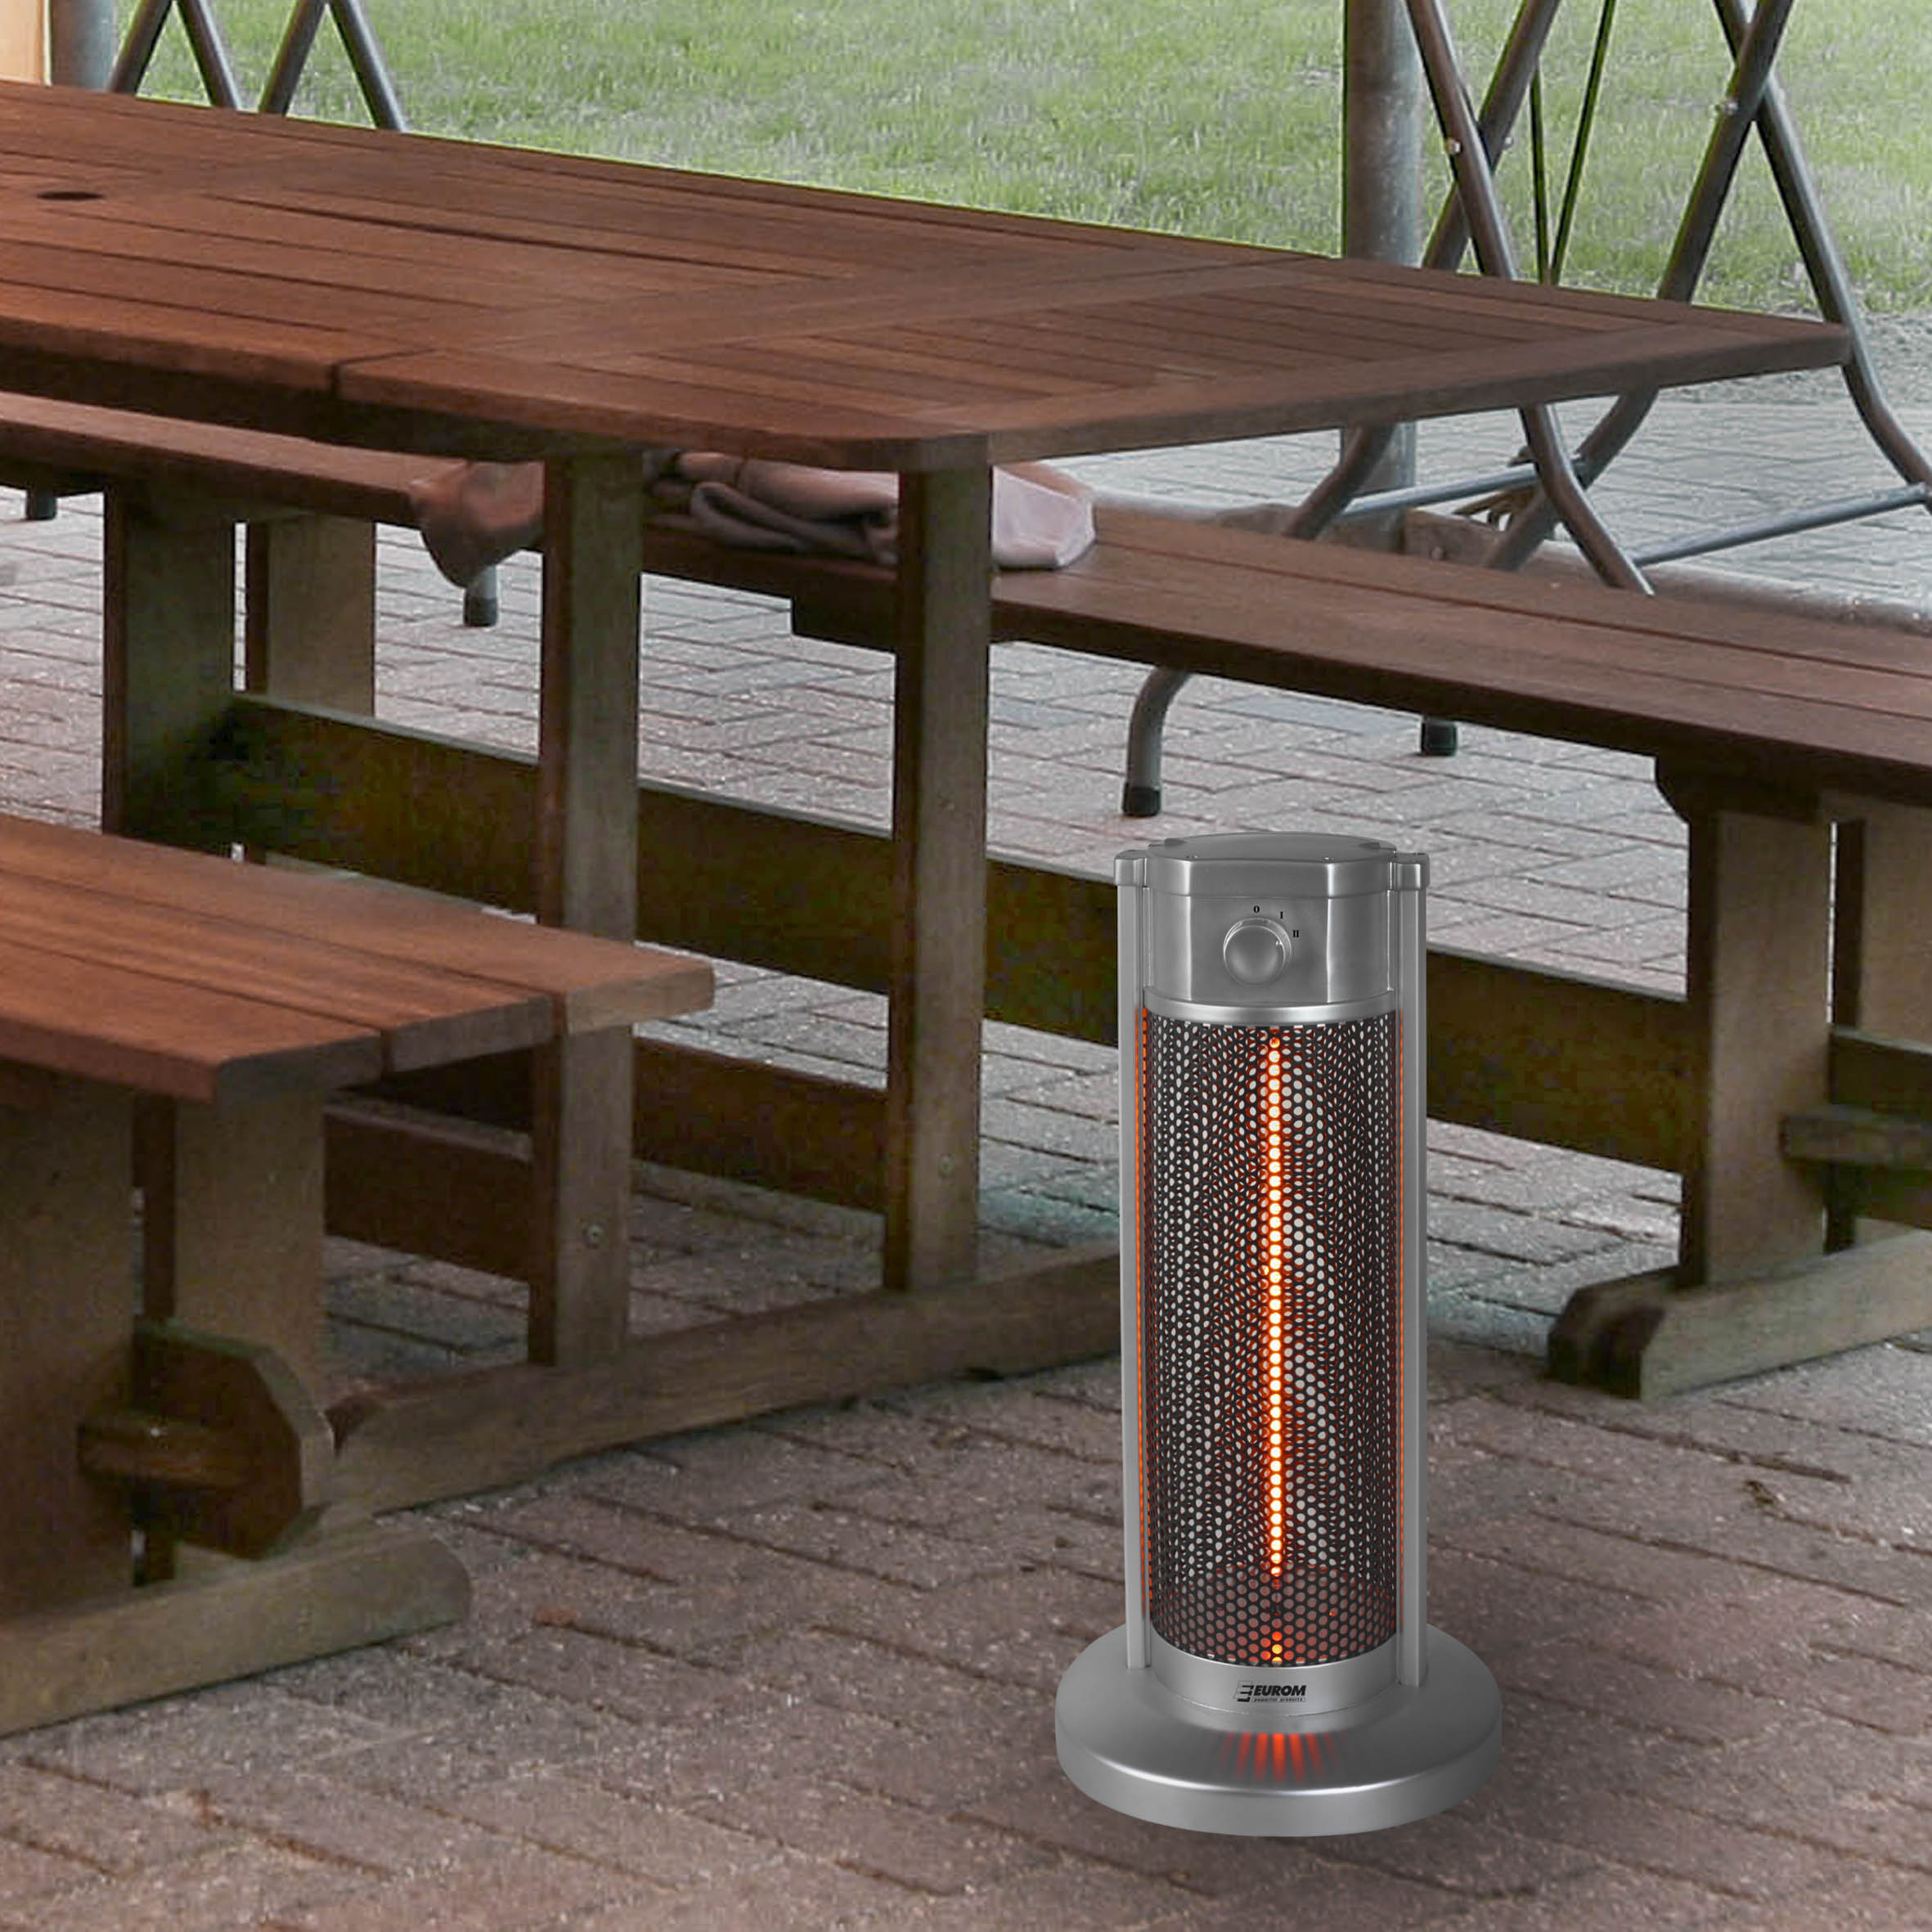 Infra-red Under-table Heater